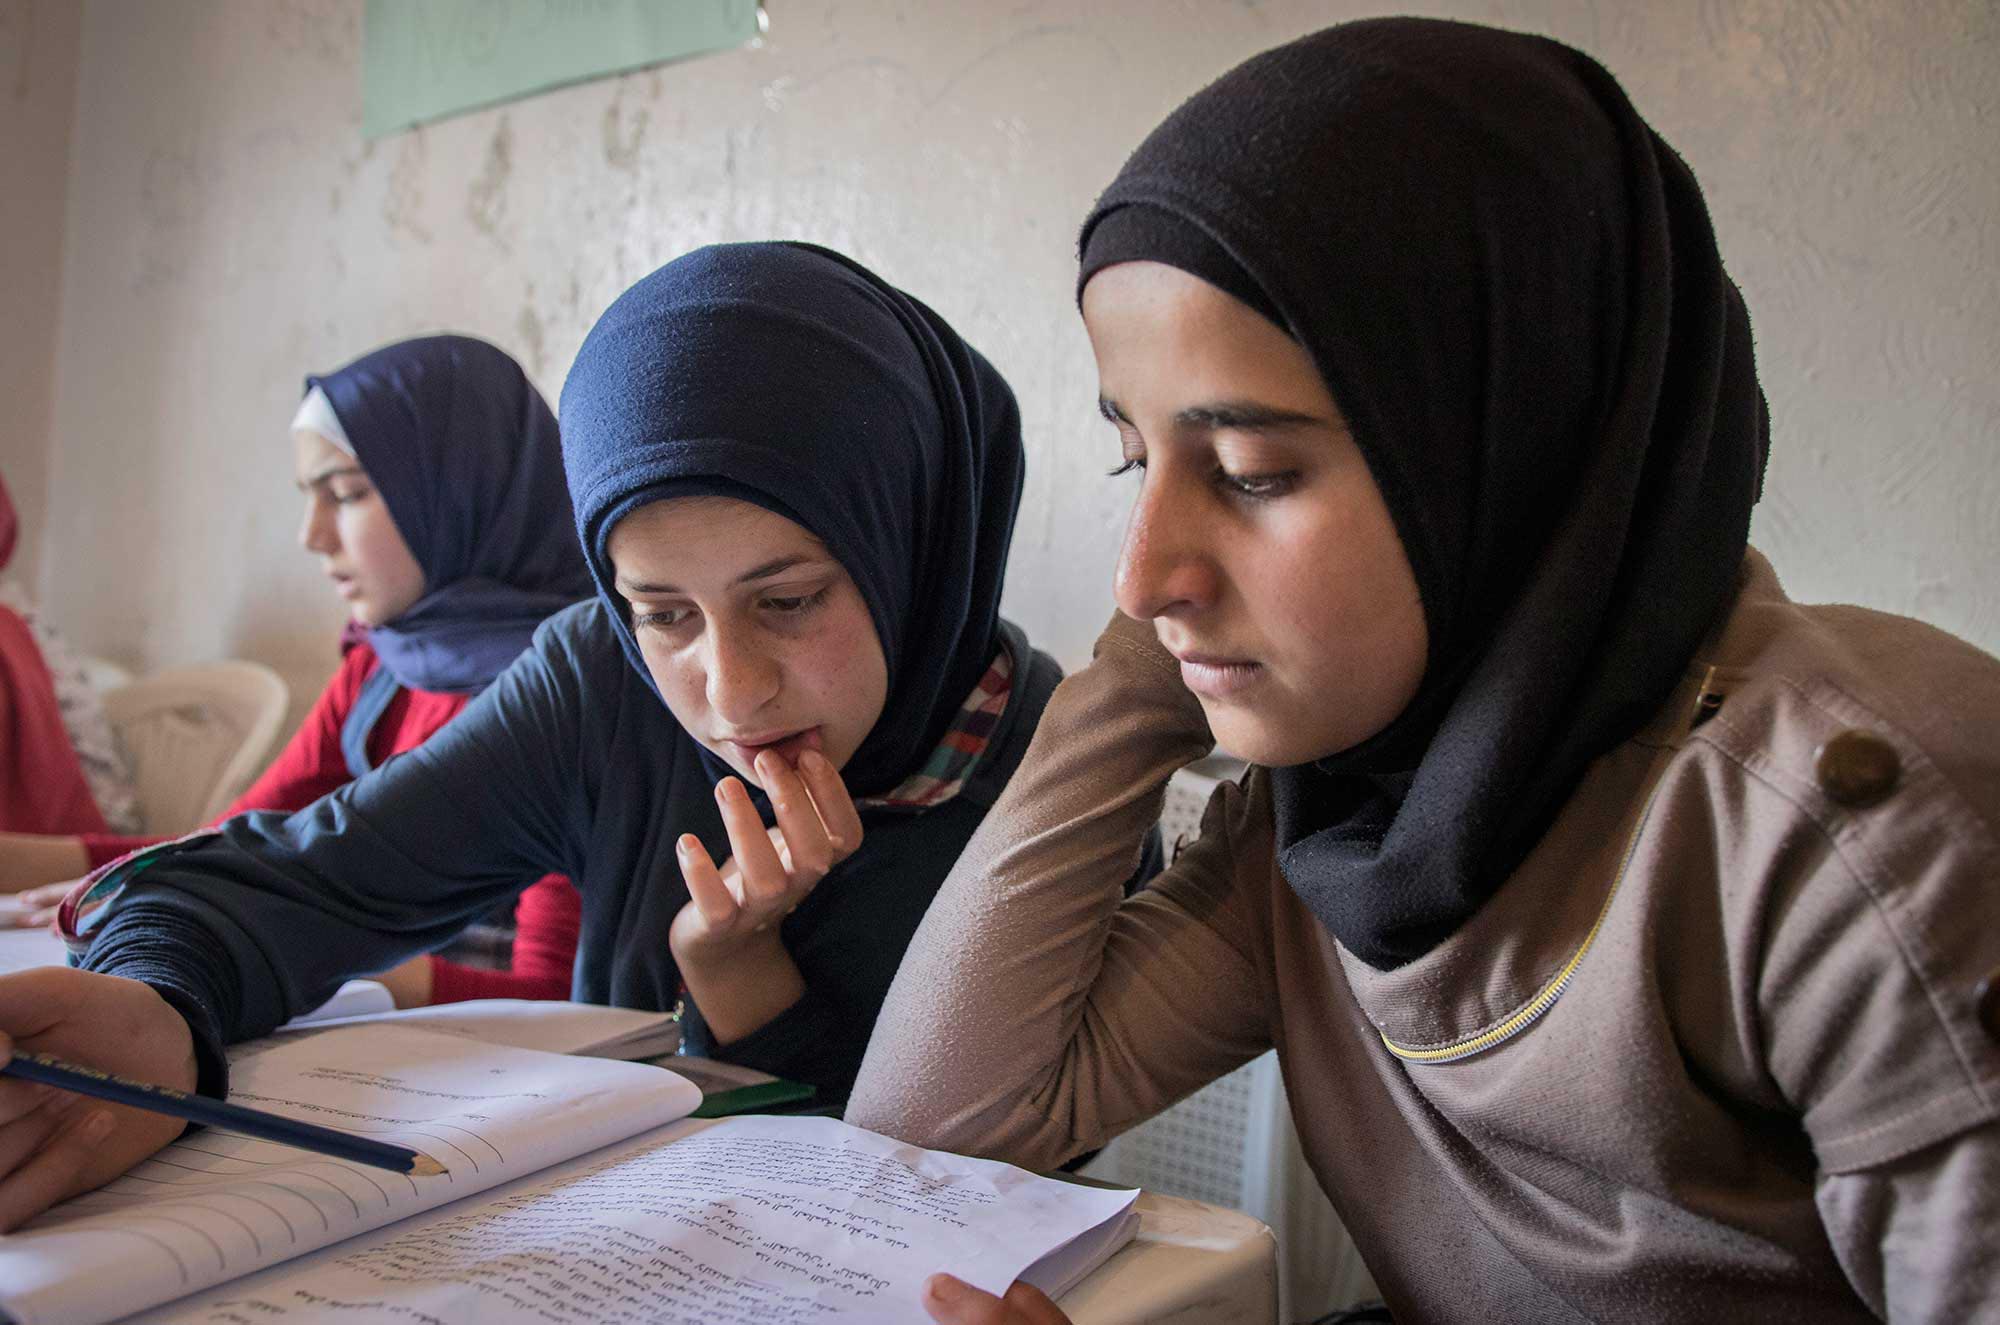 Mona attends literacy classes as part of Anera's program for refugee education in Lebanon.